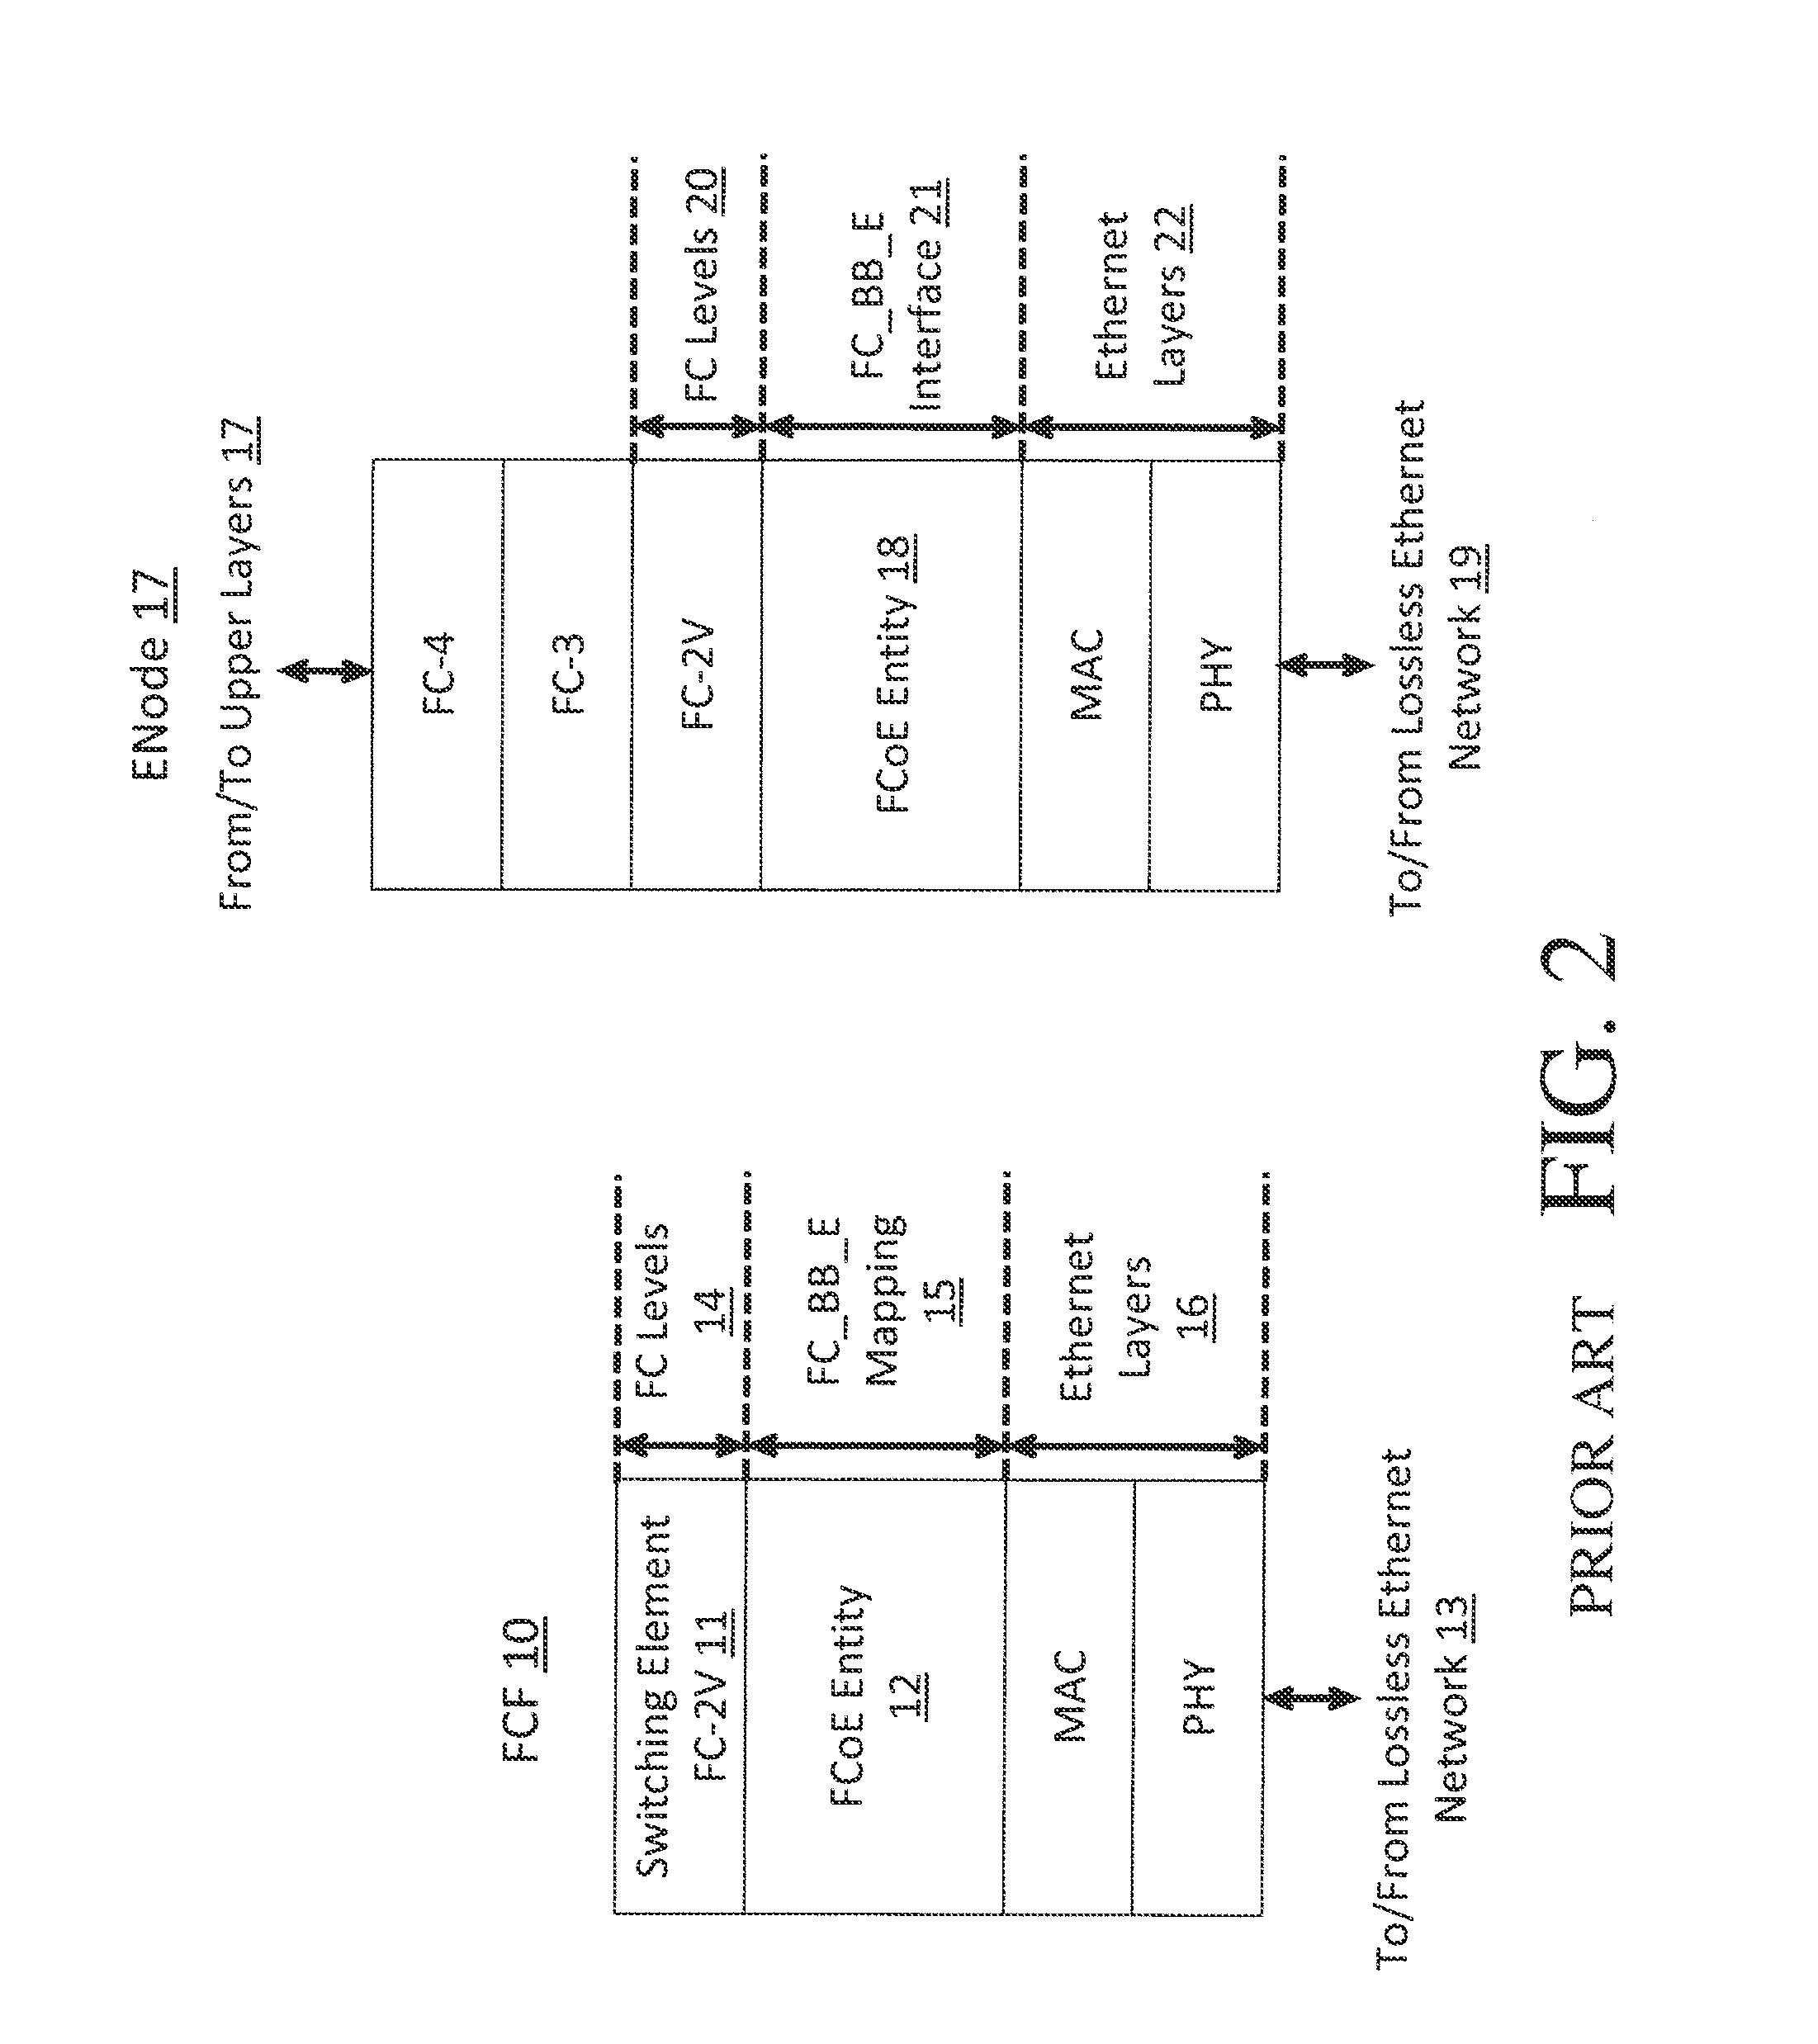 Methods for creating virtual links between fibre channel over ethernet nodes for converged network adapters